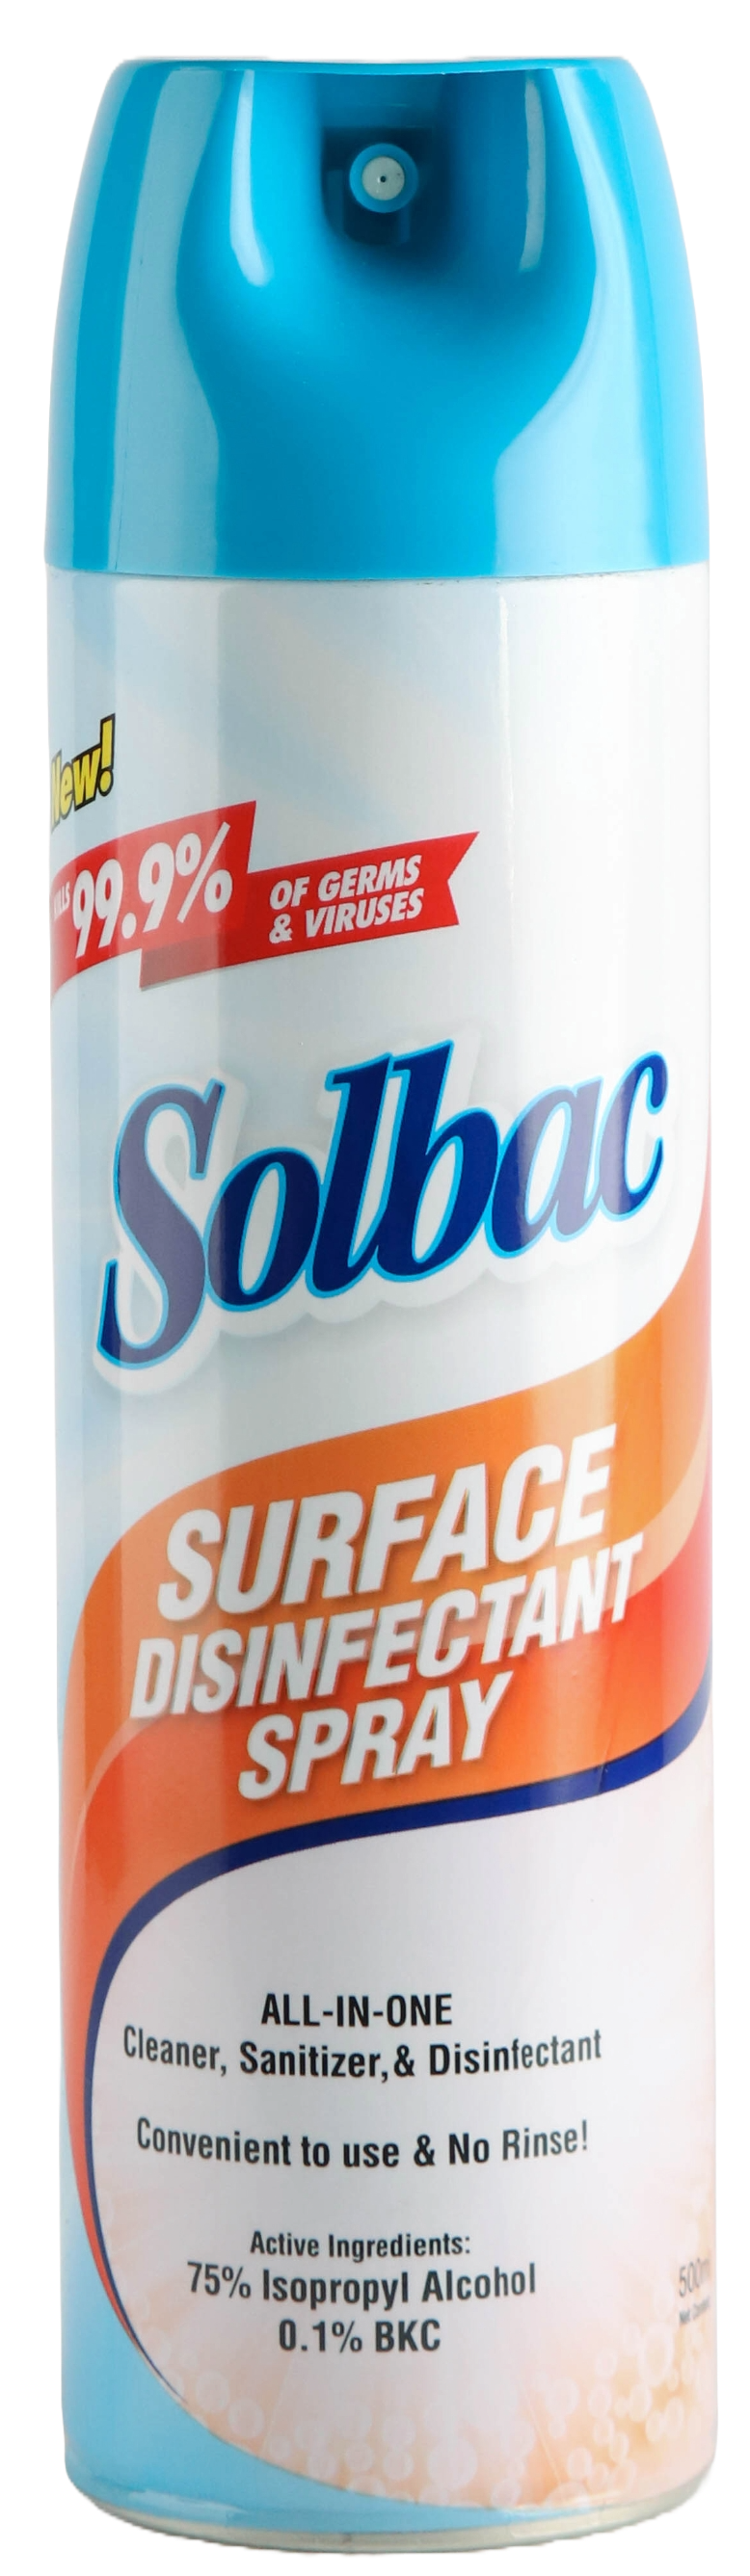 solbac surface disinfectant